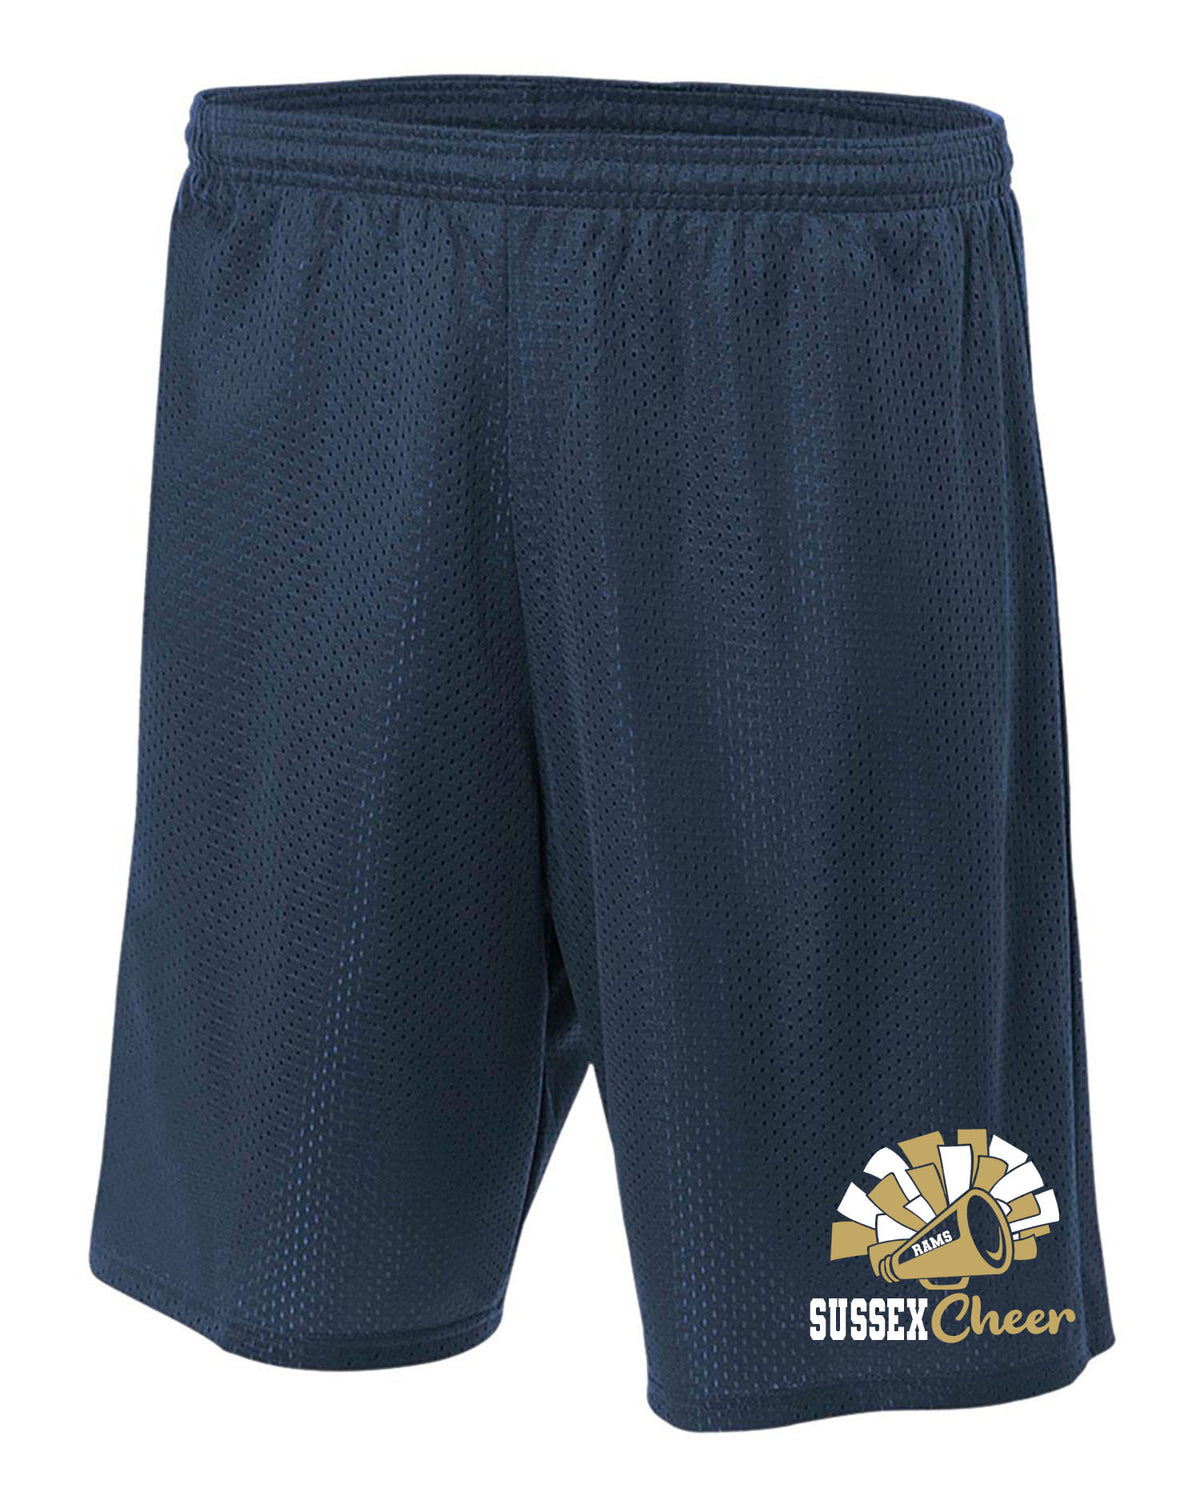 Sussex Middle Cheer Design 2 Mesh Shorts